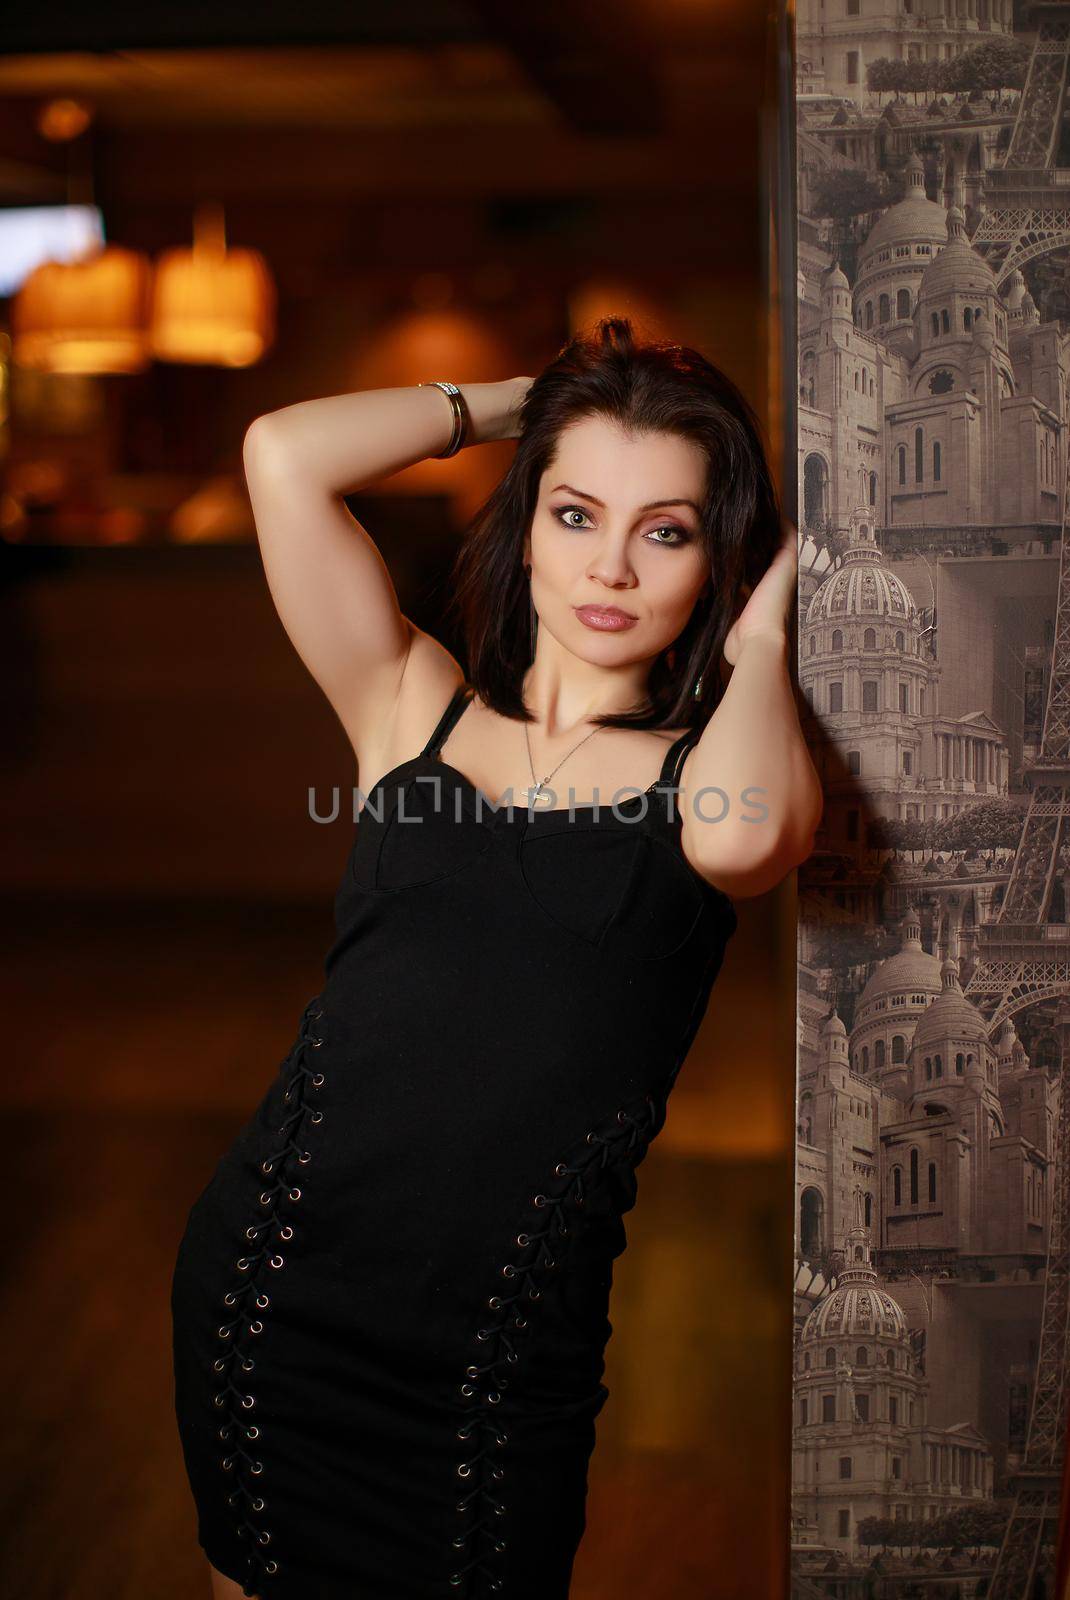 Gorgeous beauty young brunette woman in black dress posing at the bar